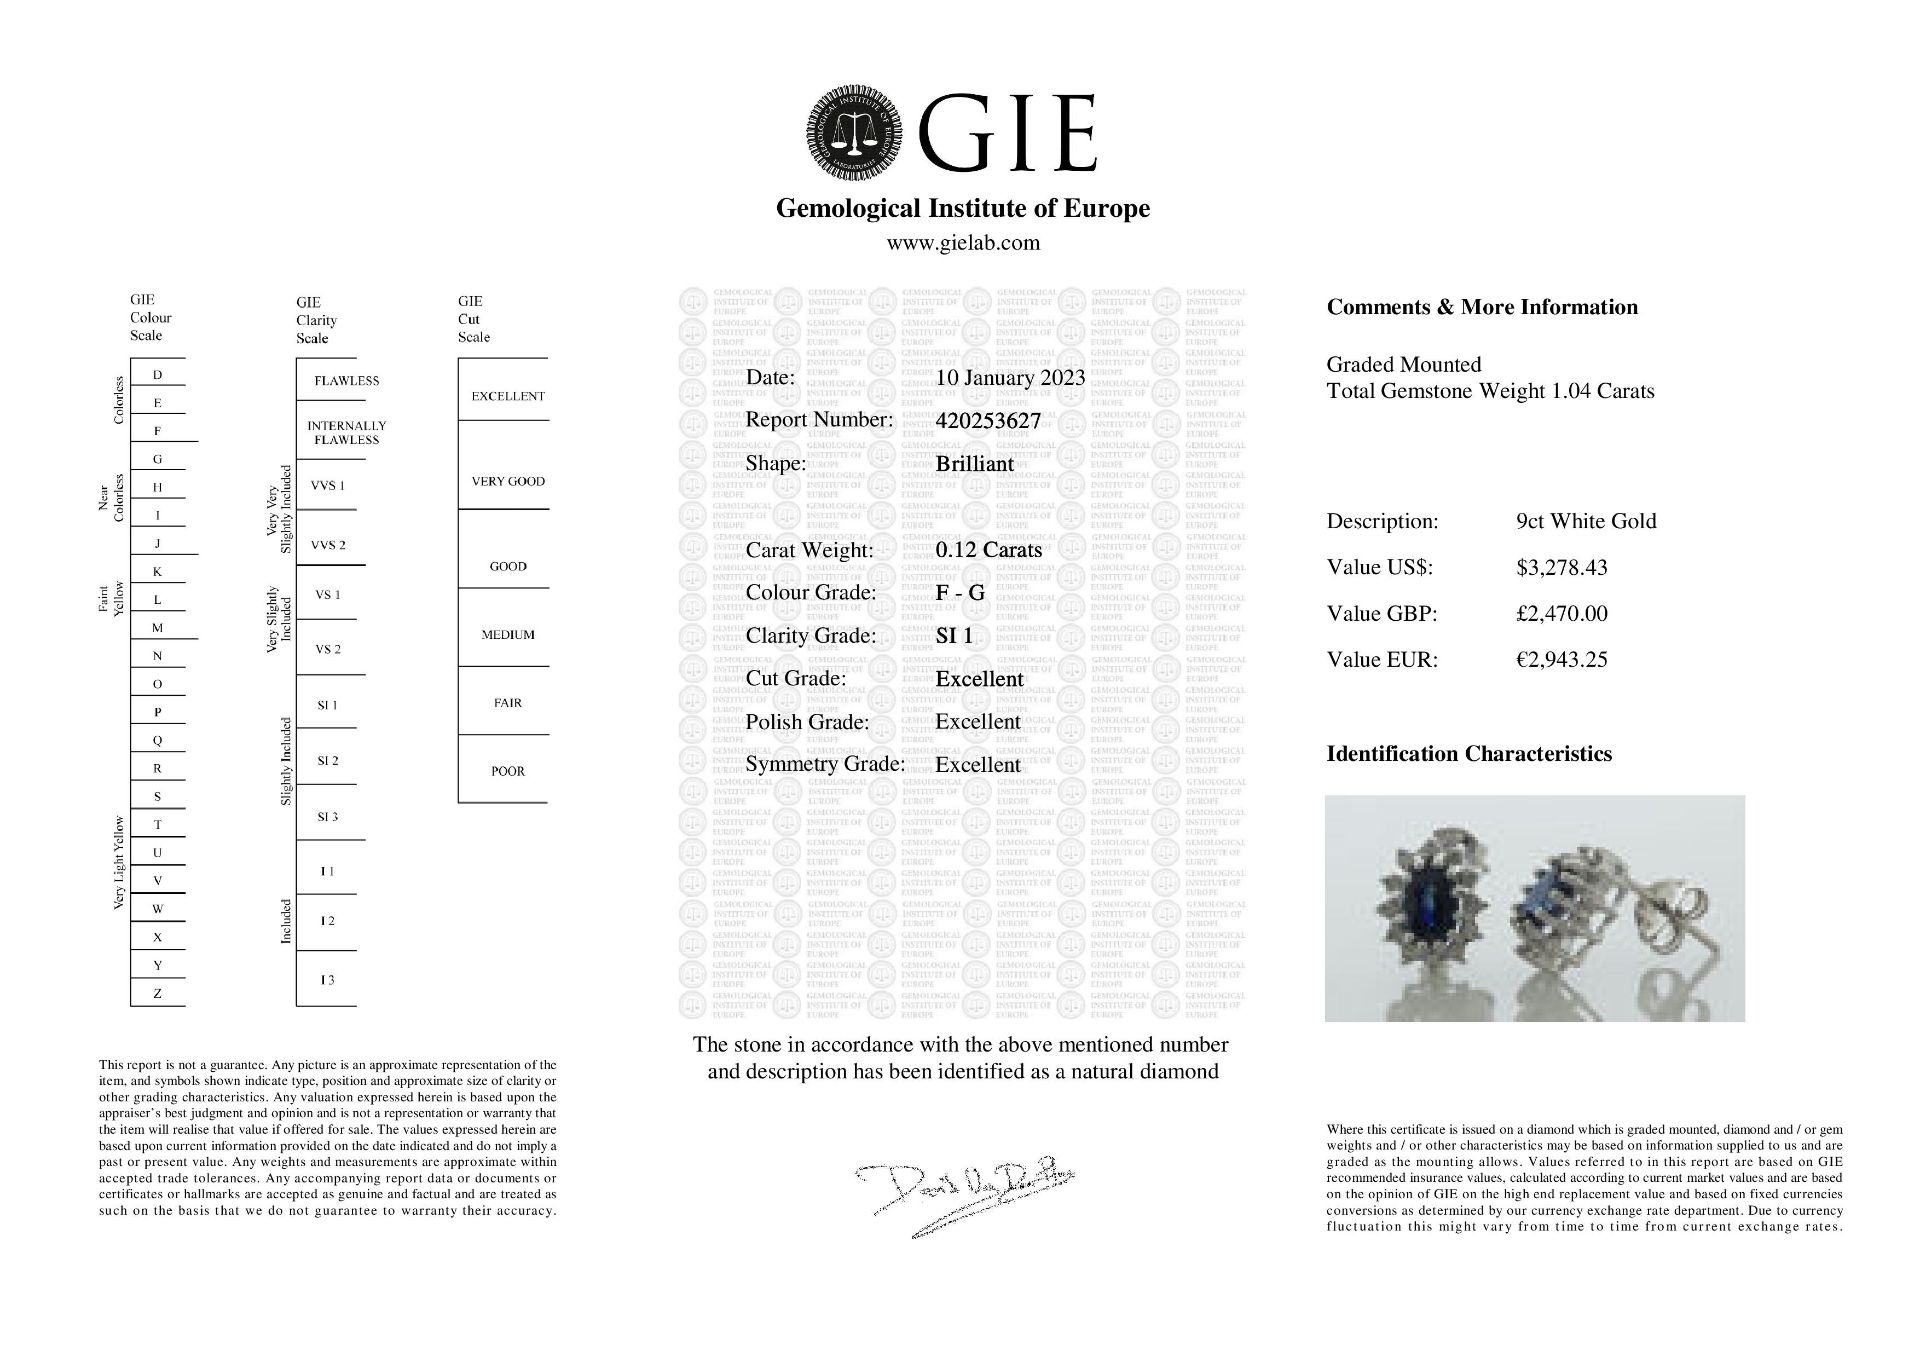 9ct White Gold Diamond And Sapphire Earring (S1.04) 0.12 Carats - Valued By GIE £2,470.00 - These - Image 2 of 2